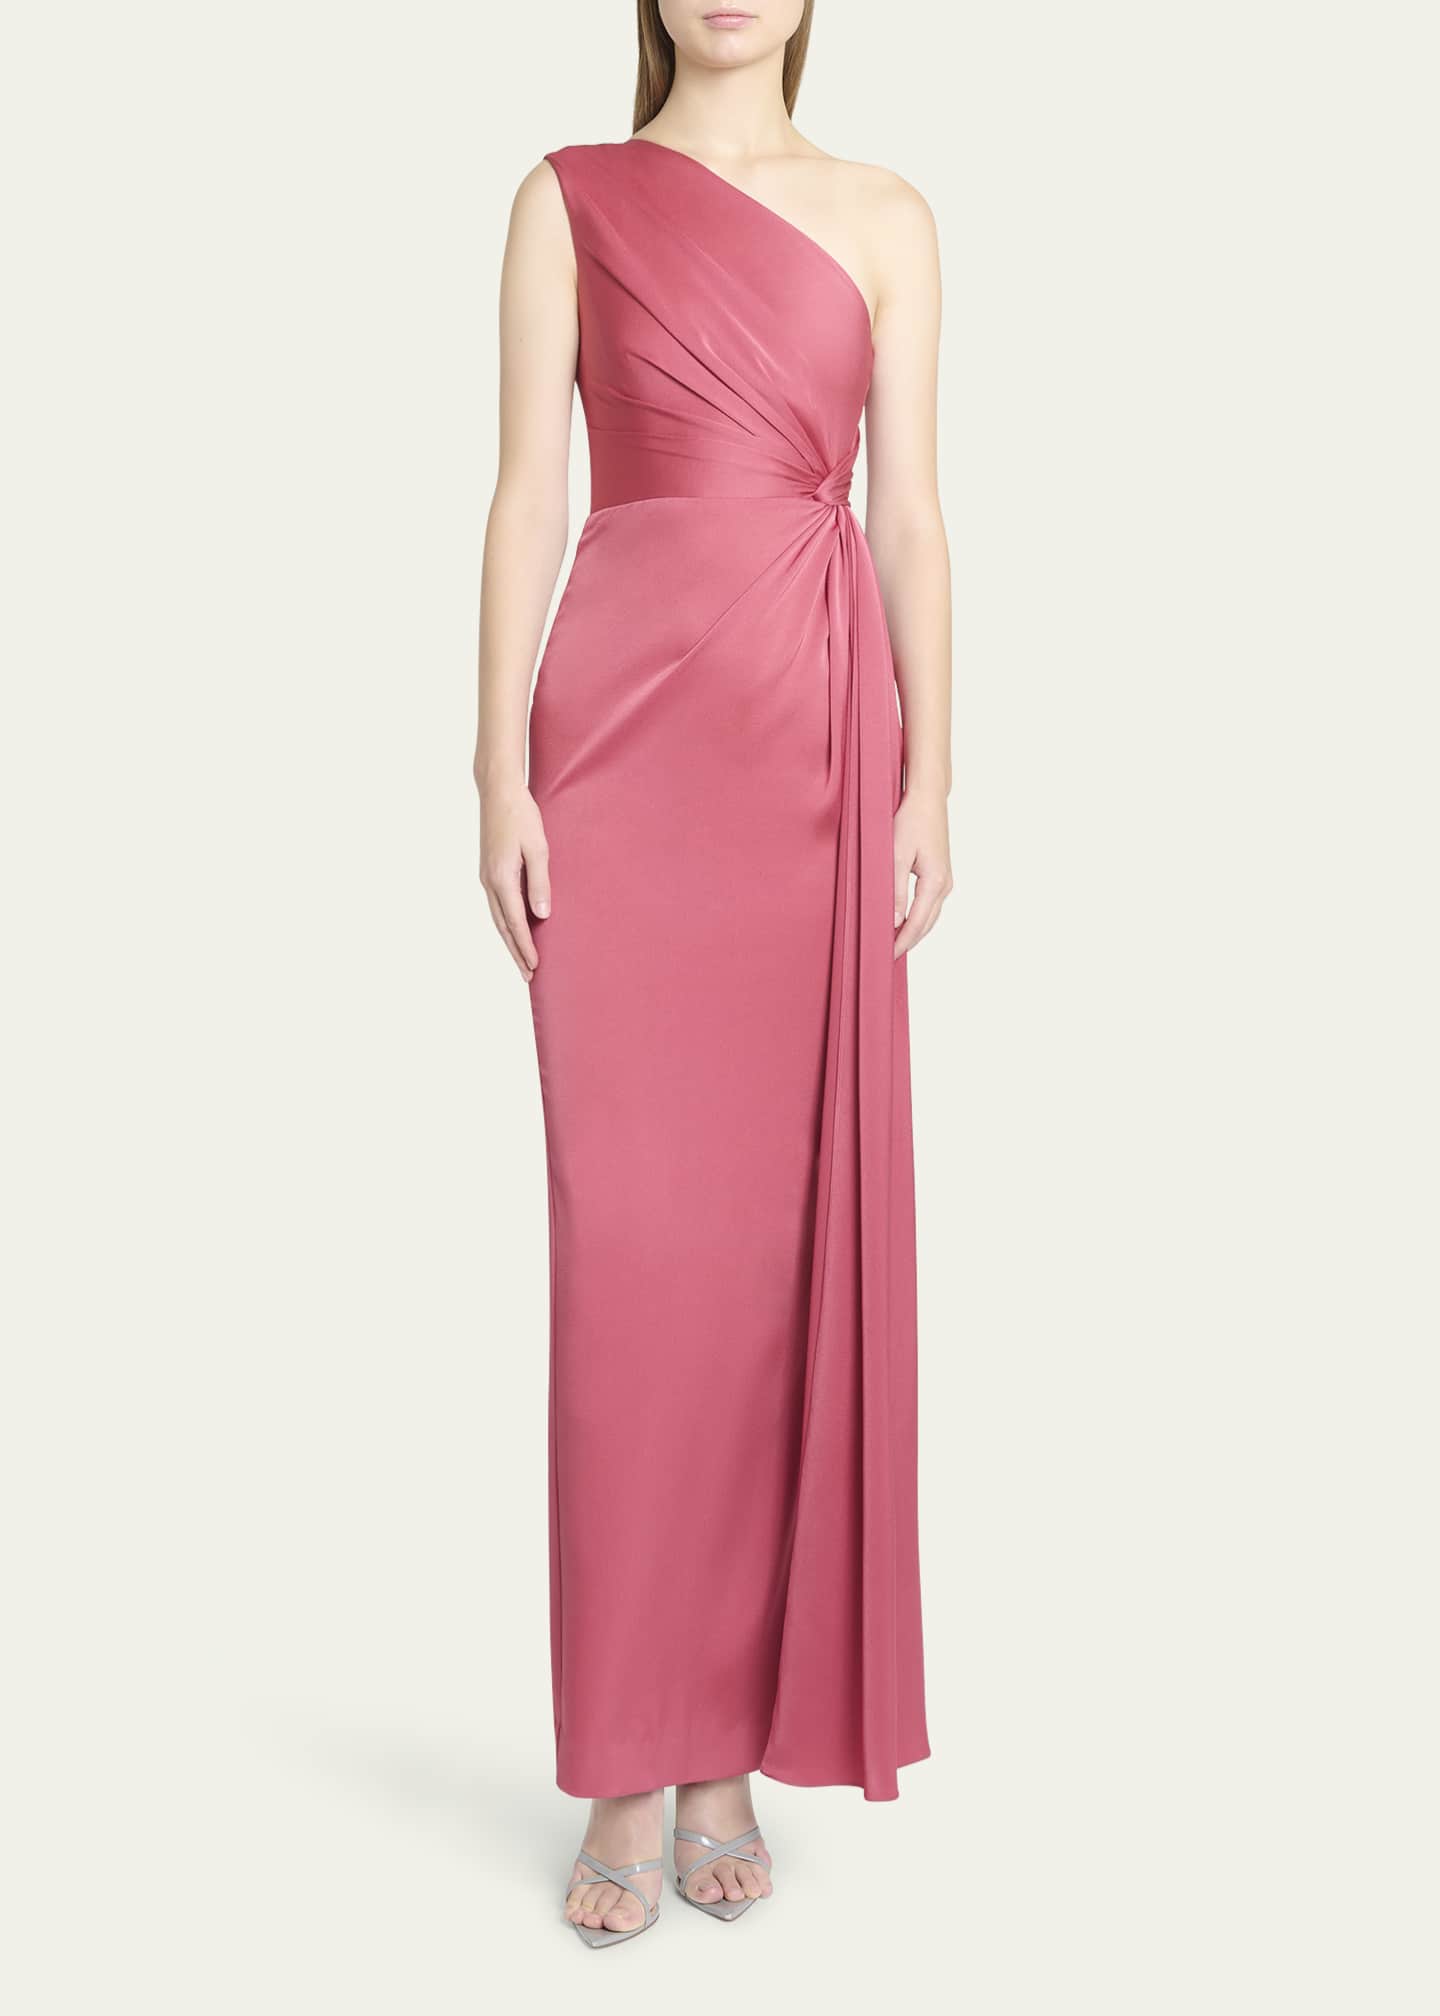 Alex Perry One-Shoulder Twisted Satin Crepe Column Gown - Bergdorf Goodman